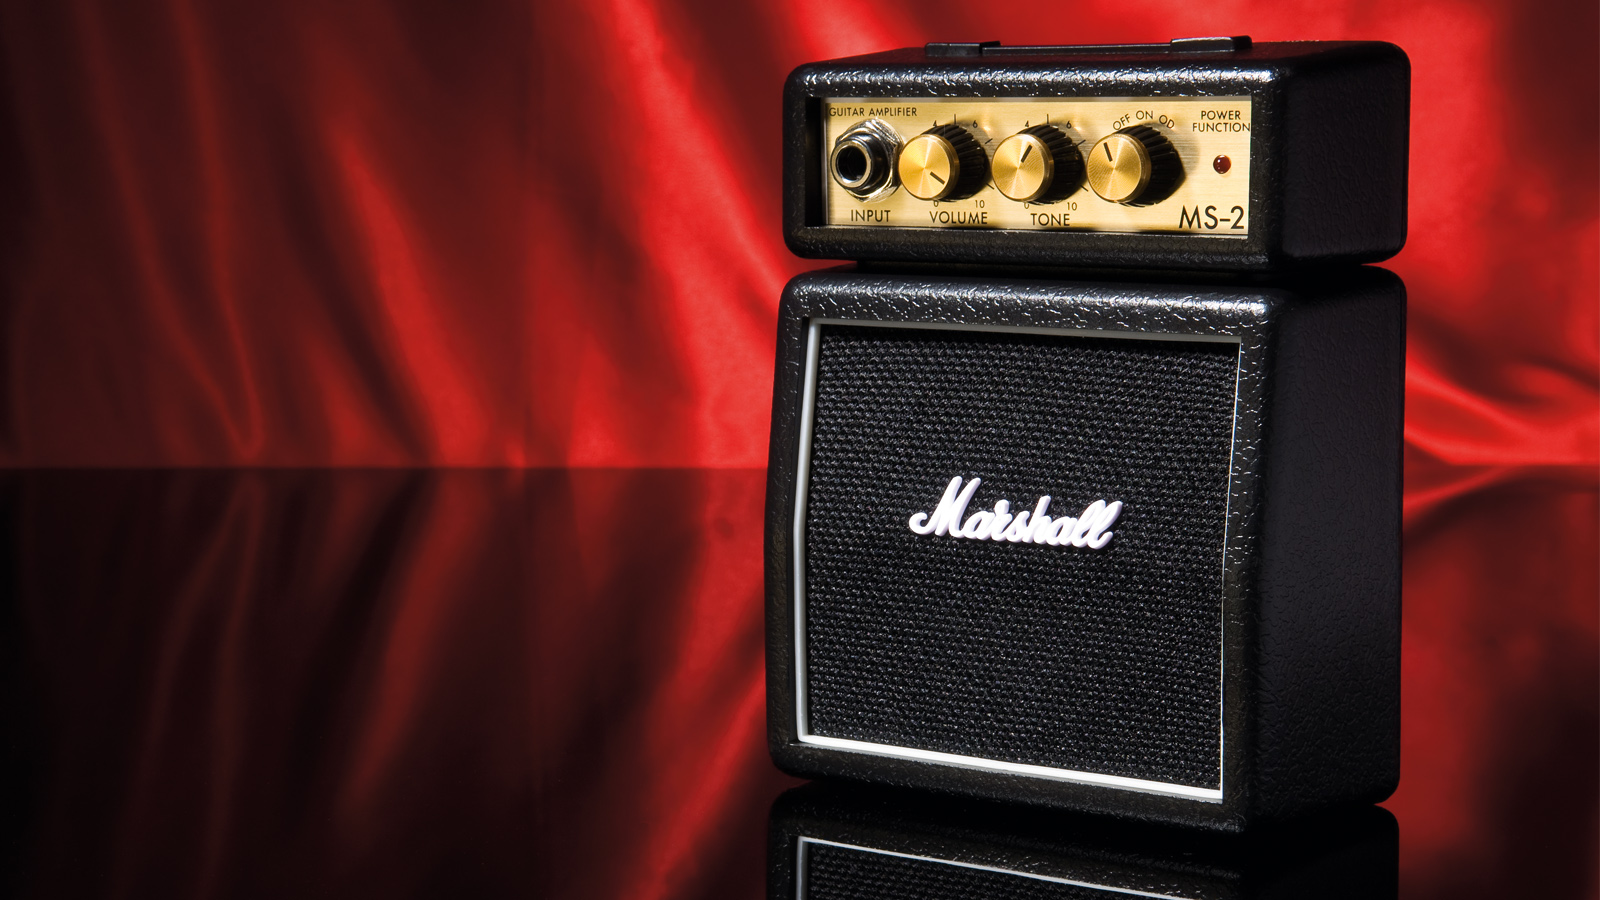 Best mini amps for guitar: Marshall MS-2